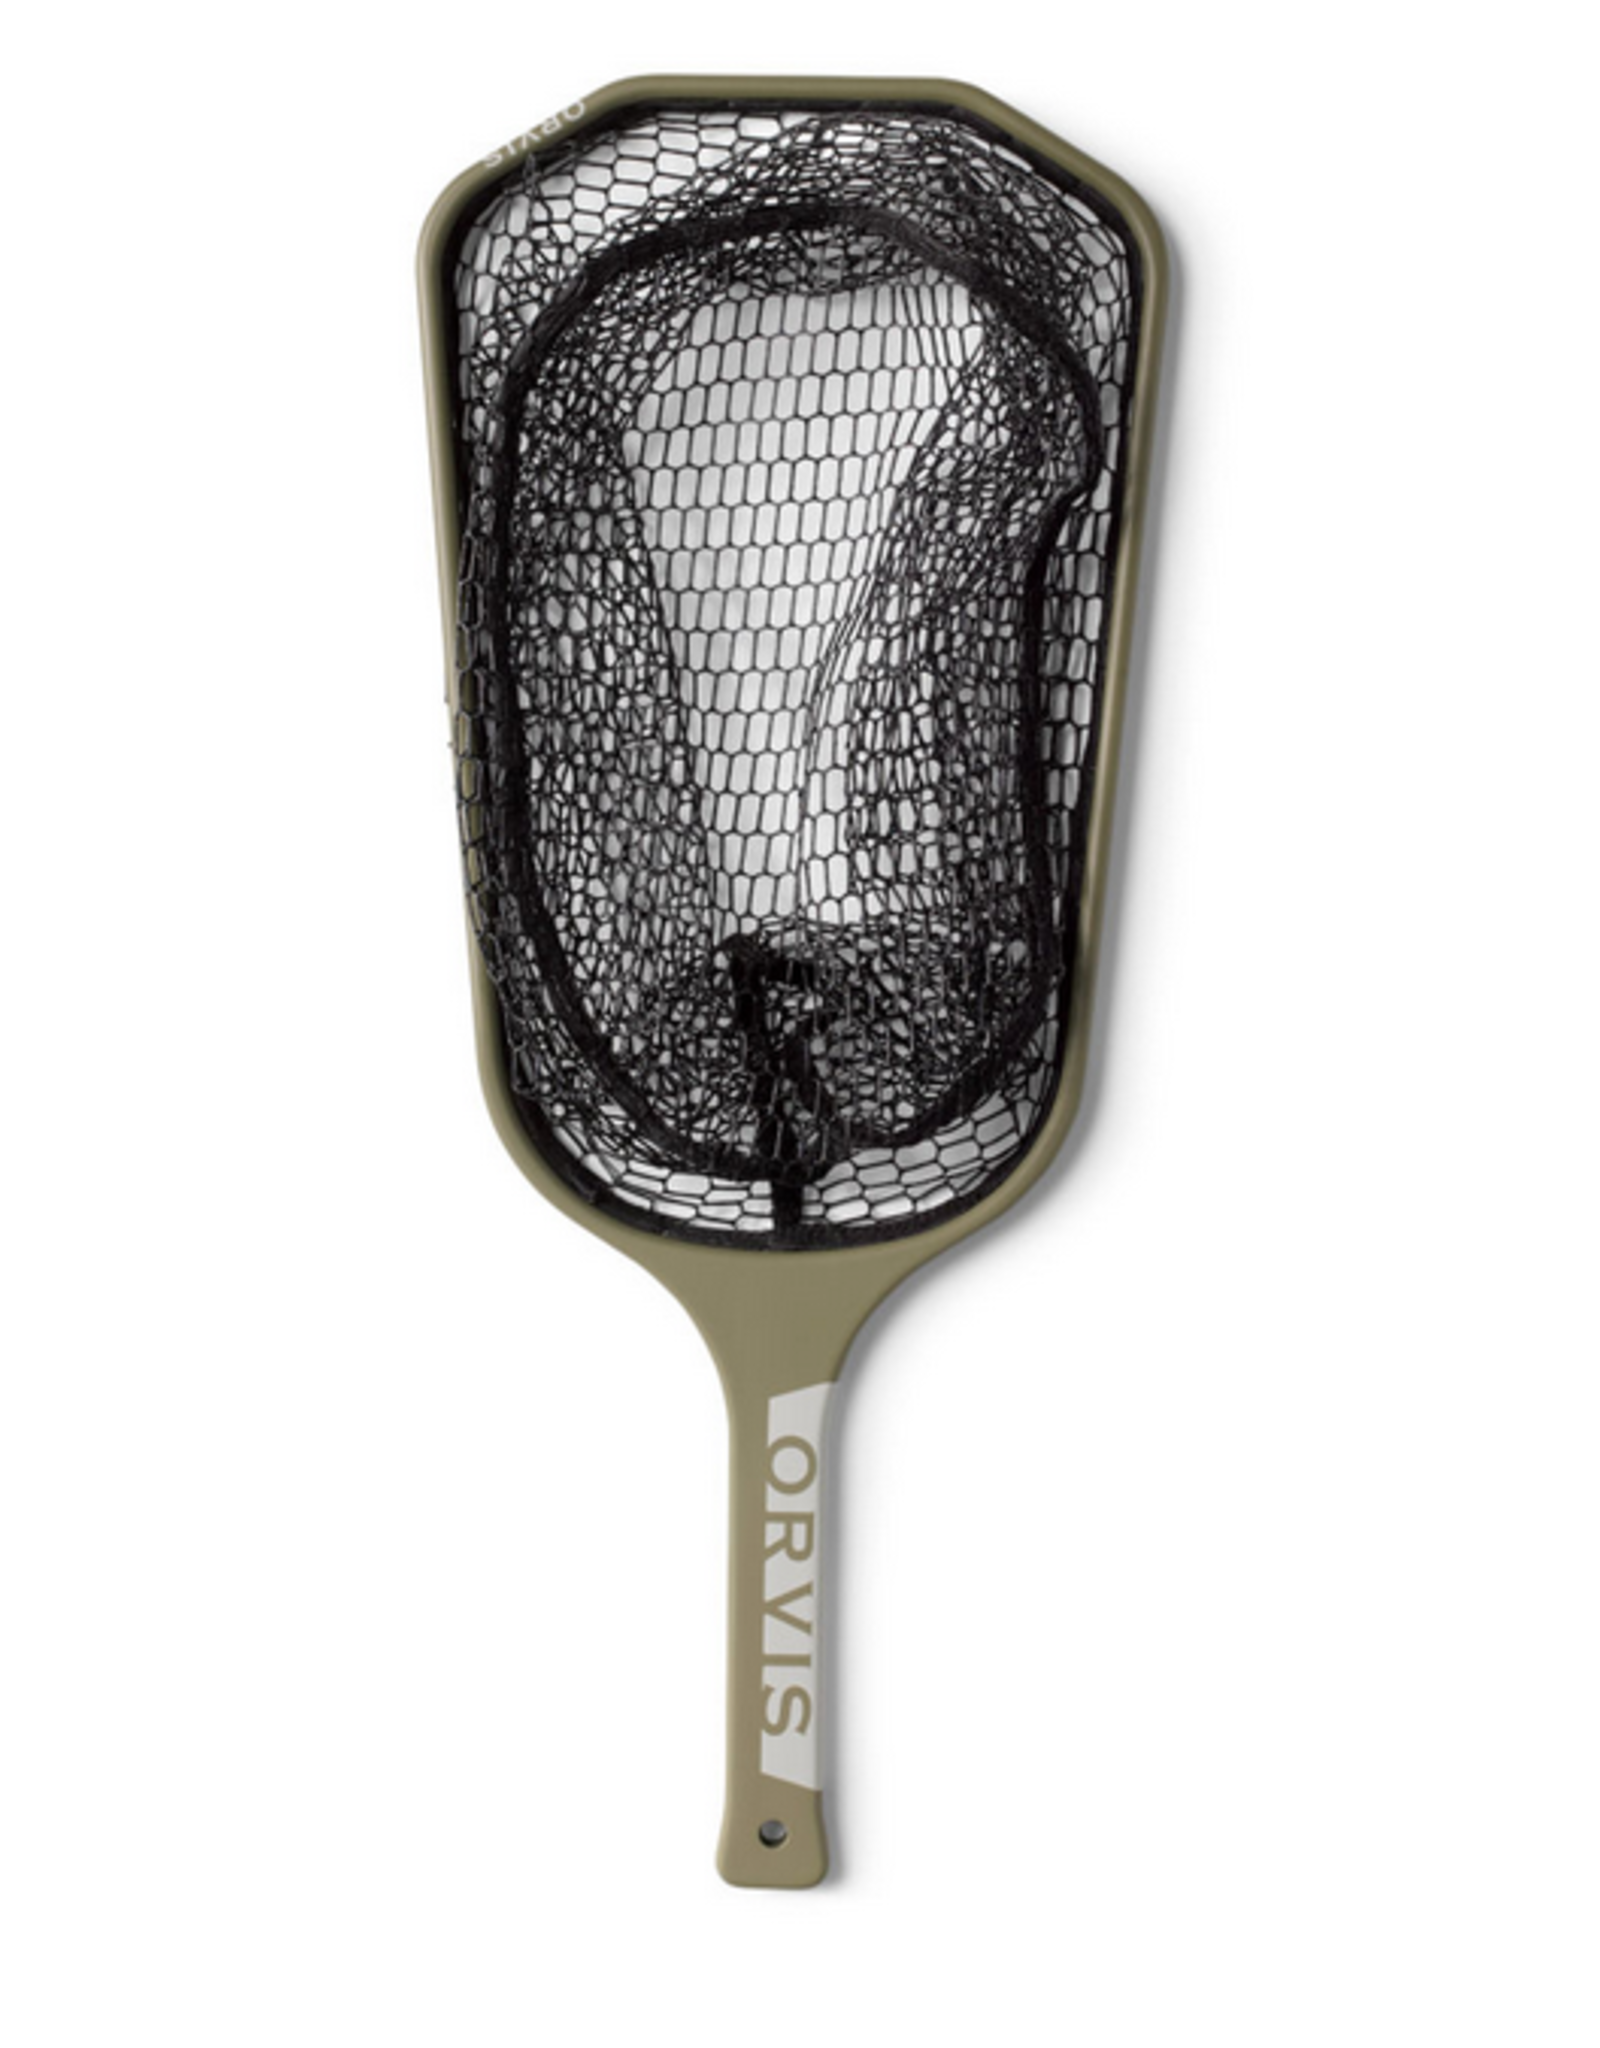 Orvis Orvis Widemouth Hand Net (Dusty Olive)